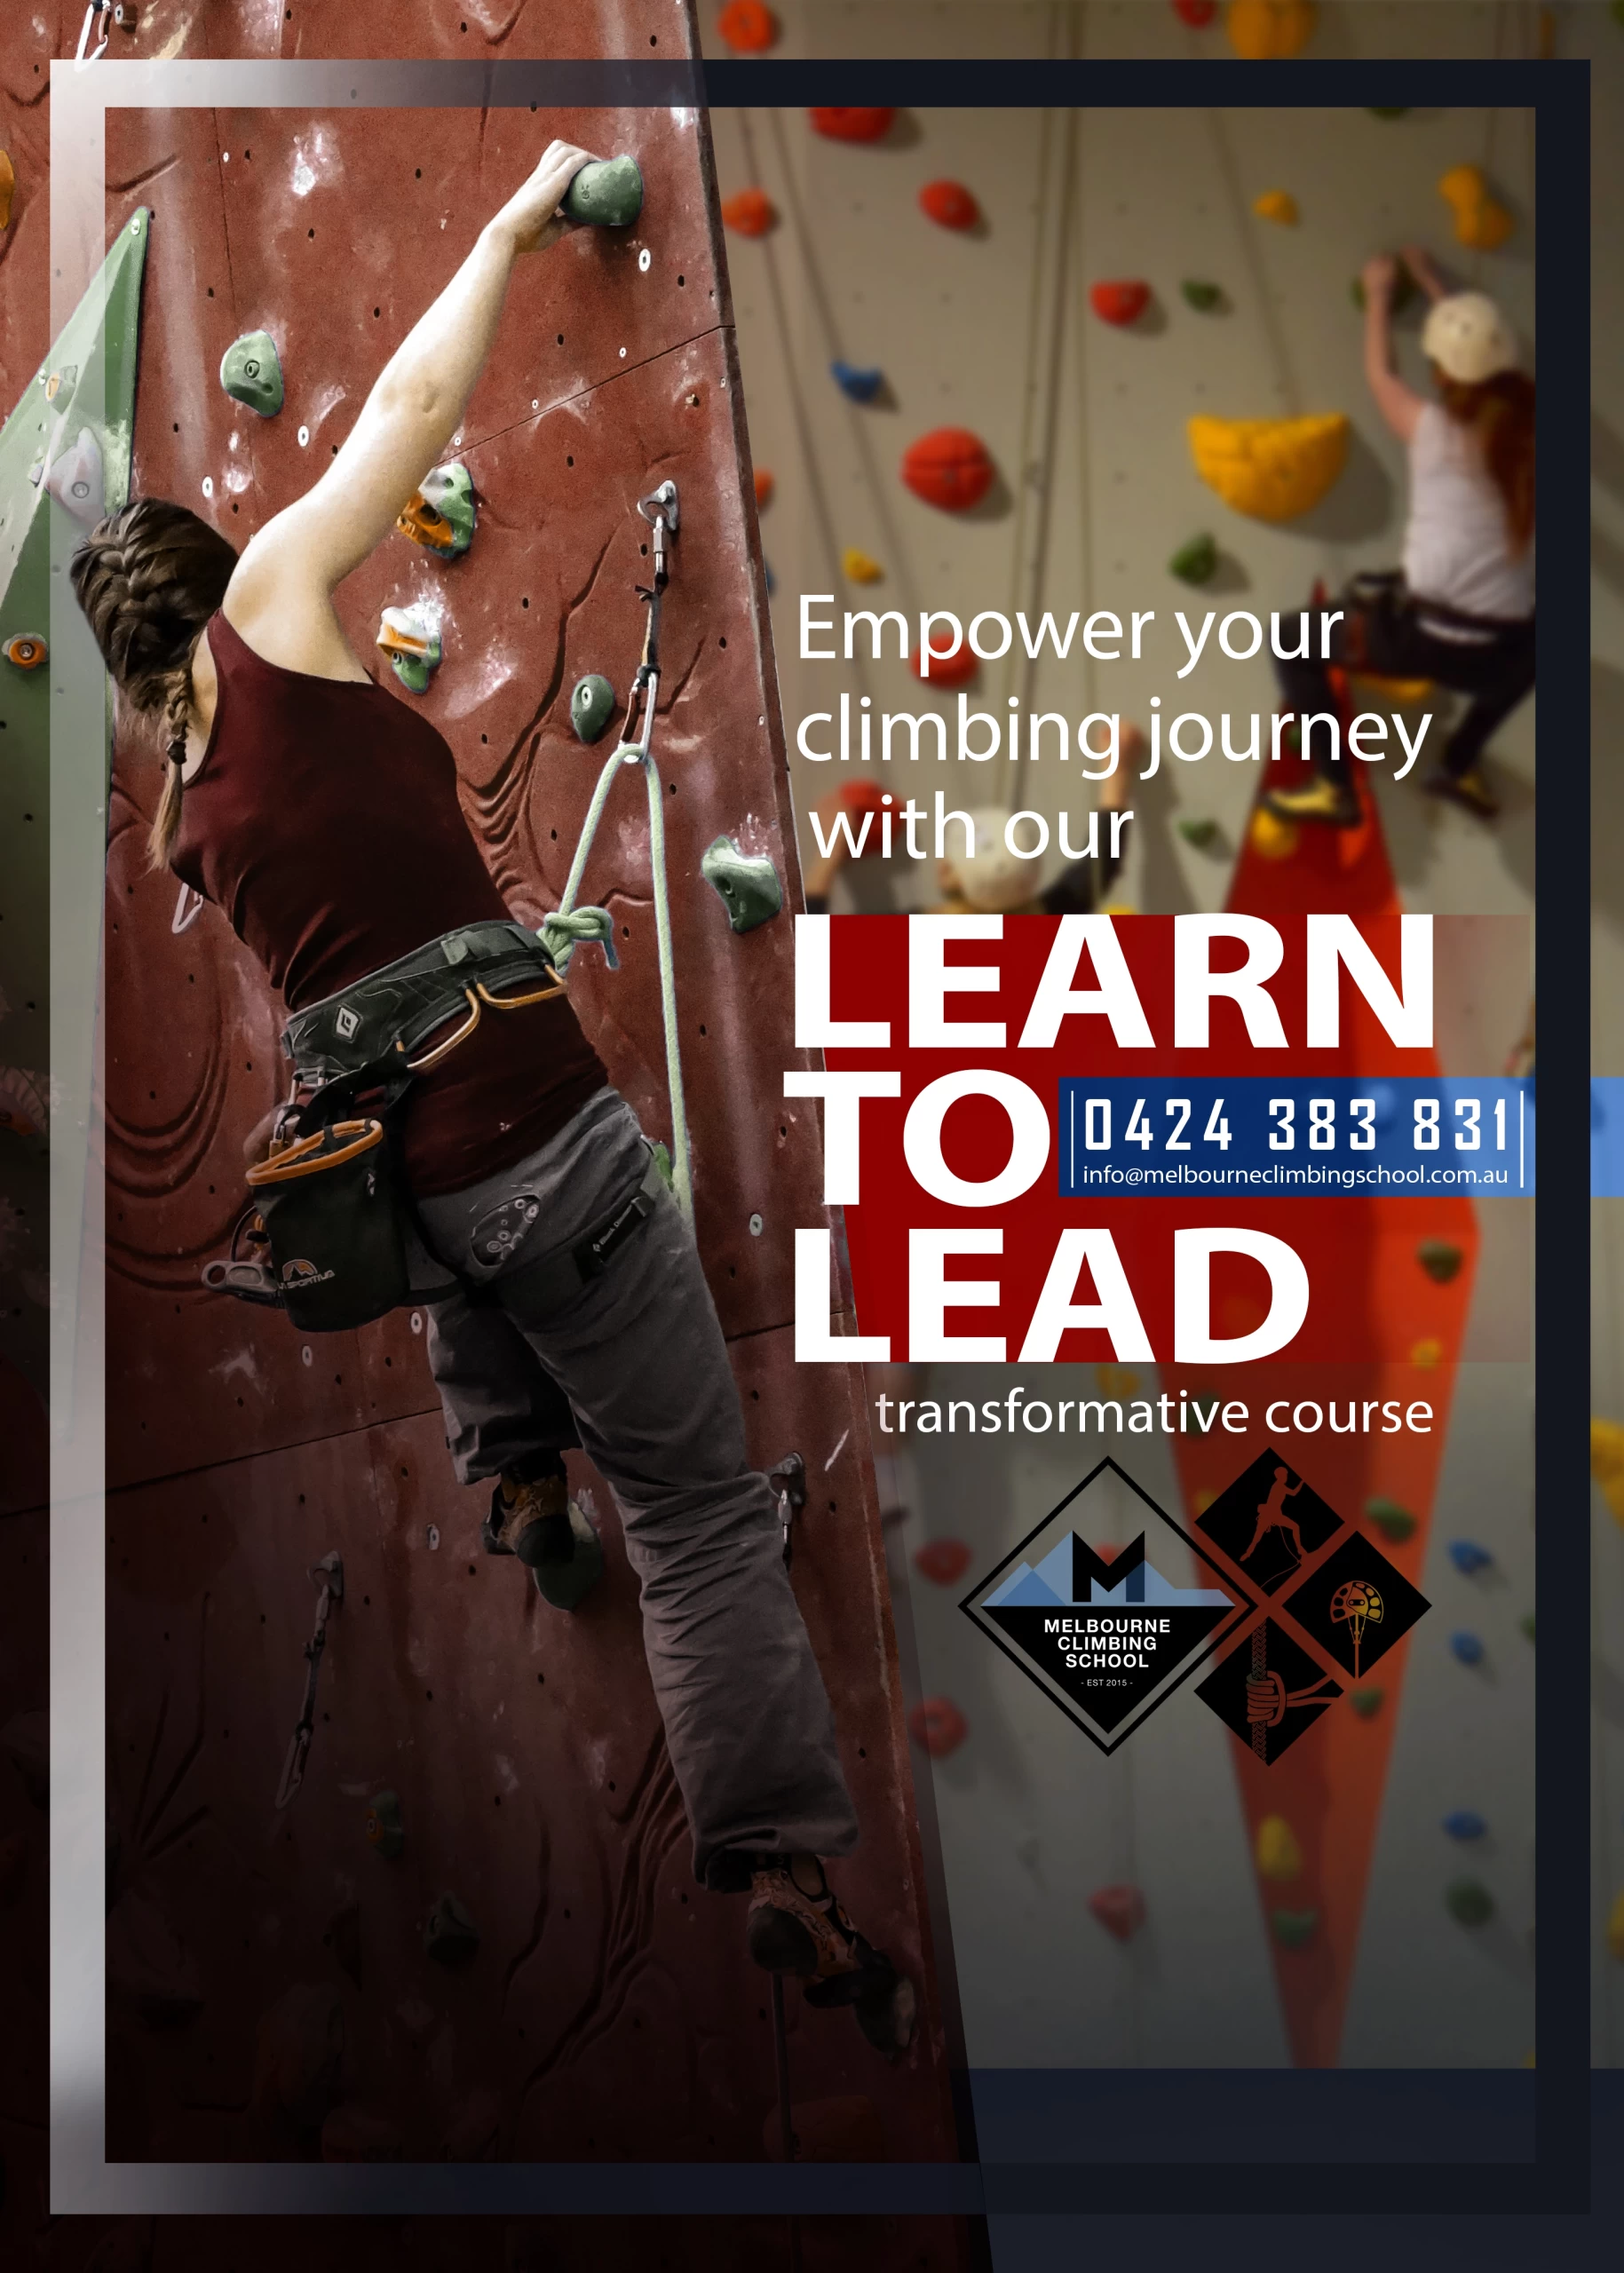 Learn to Lead course poster